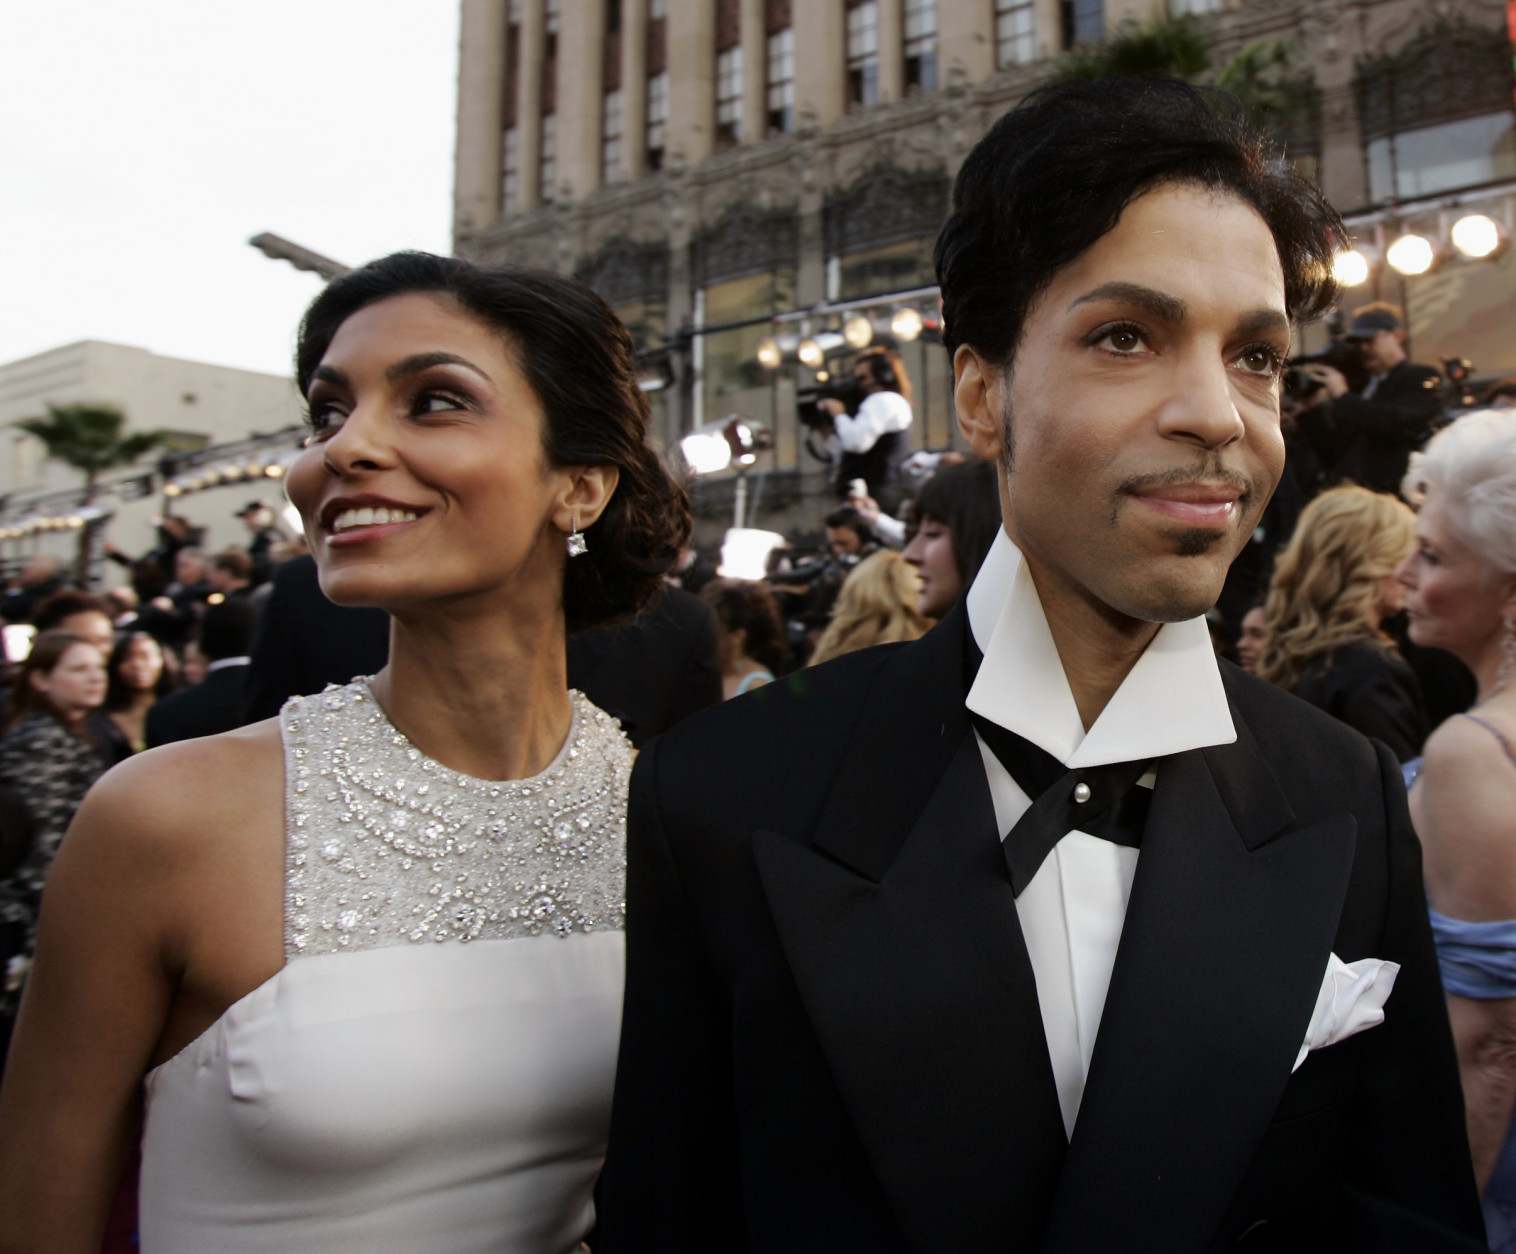 Singer Prince arrives with his wife Manuela Testolini for the 77th Academy Awards Sunday, Feb. 27, 2005, in Los Angeles. Prince will be a presenter during the Oscars telecast.  (AP Photo/Kevork Djansezian)